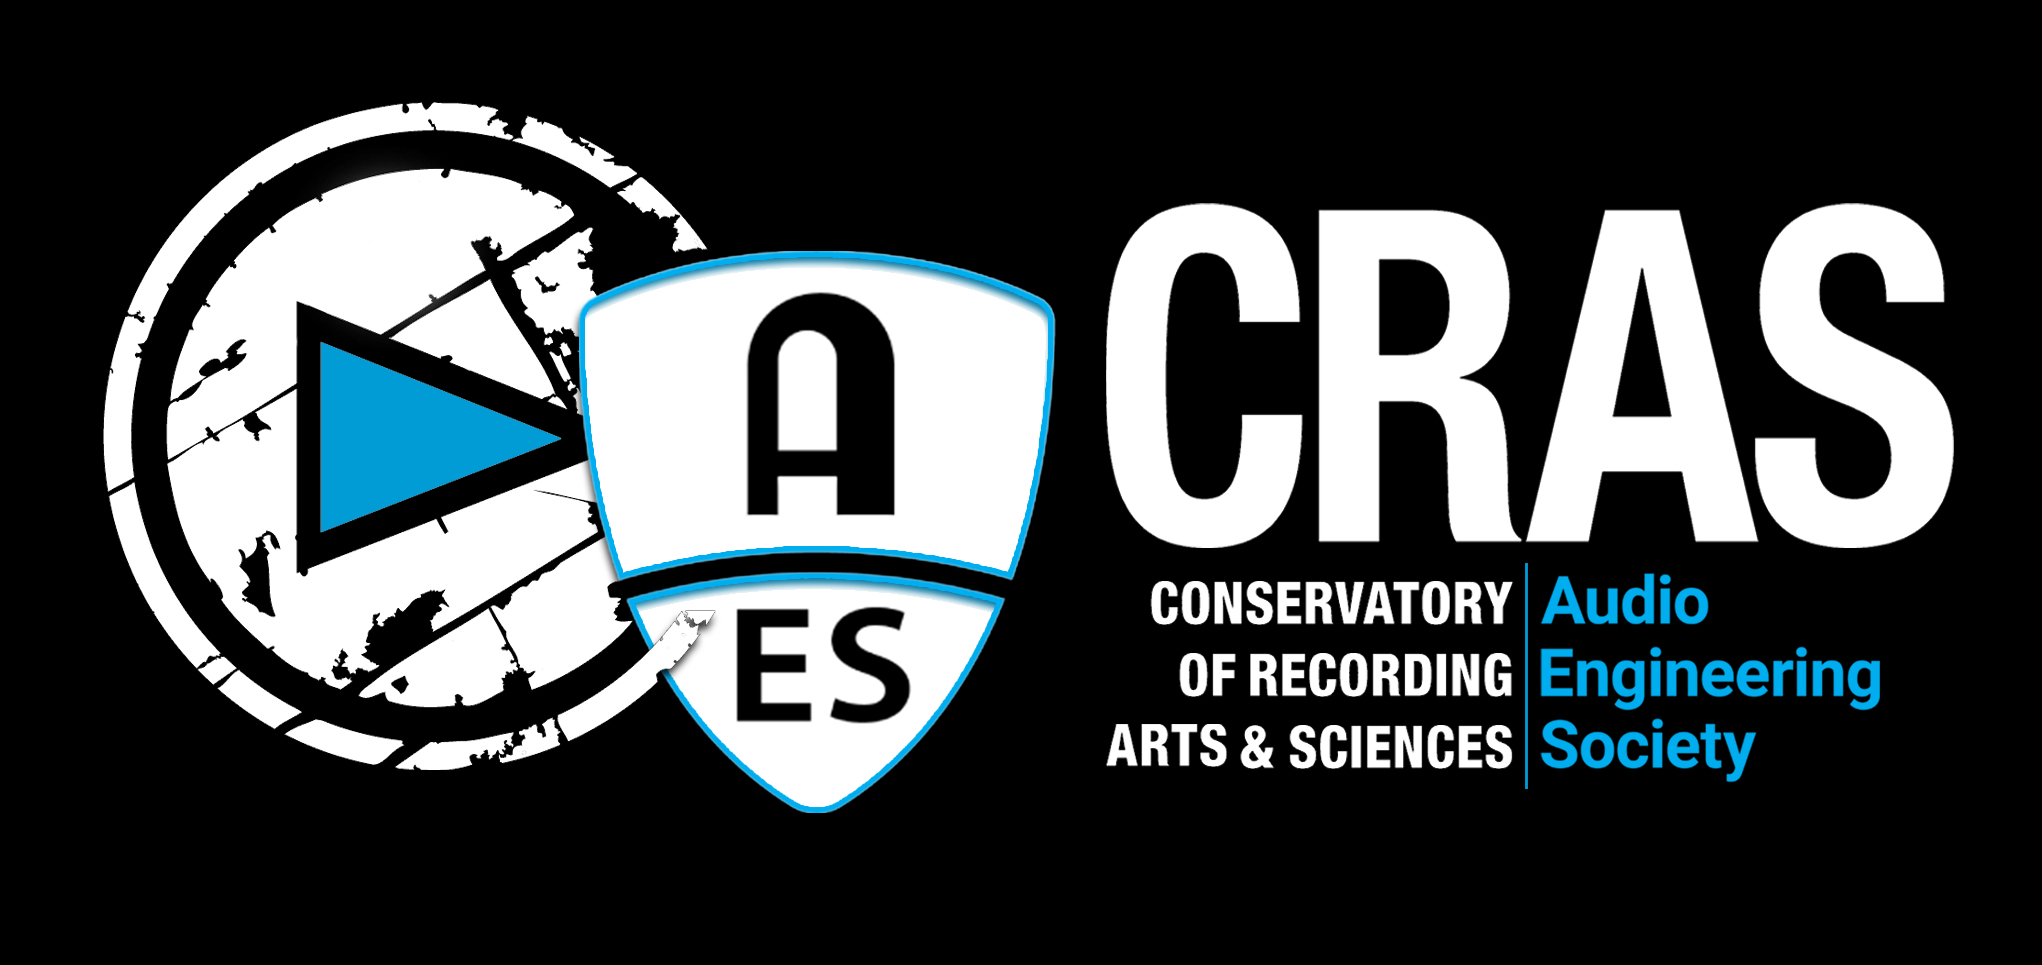 Conservatory of Recording Arts and Sciences